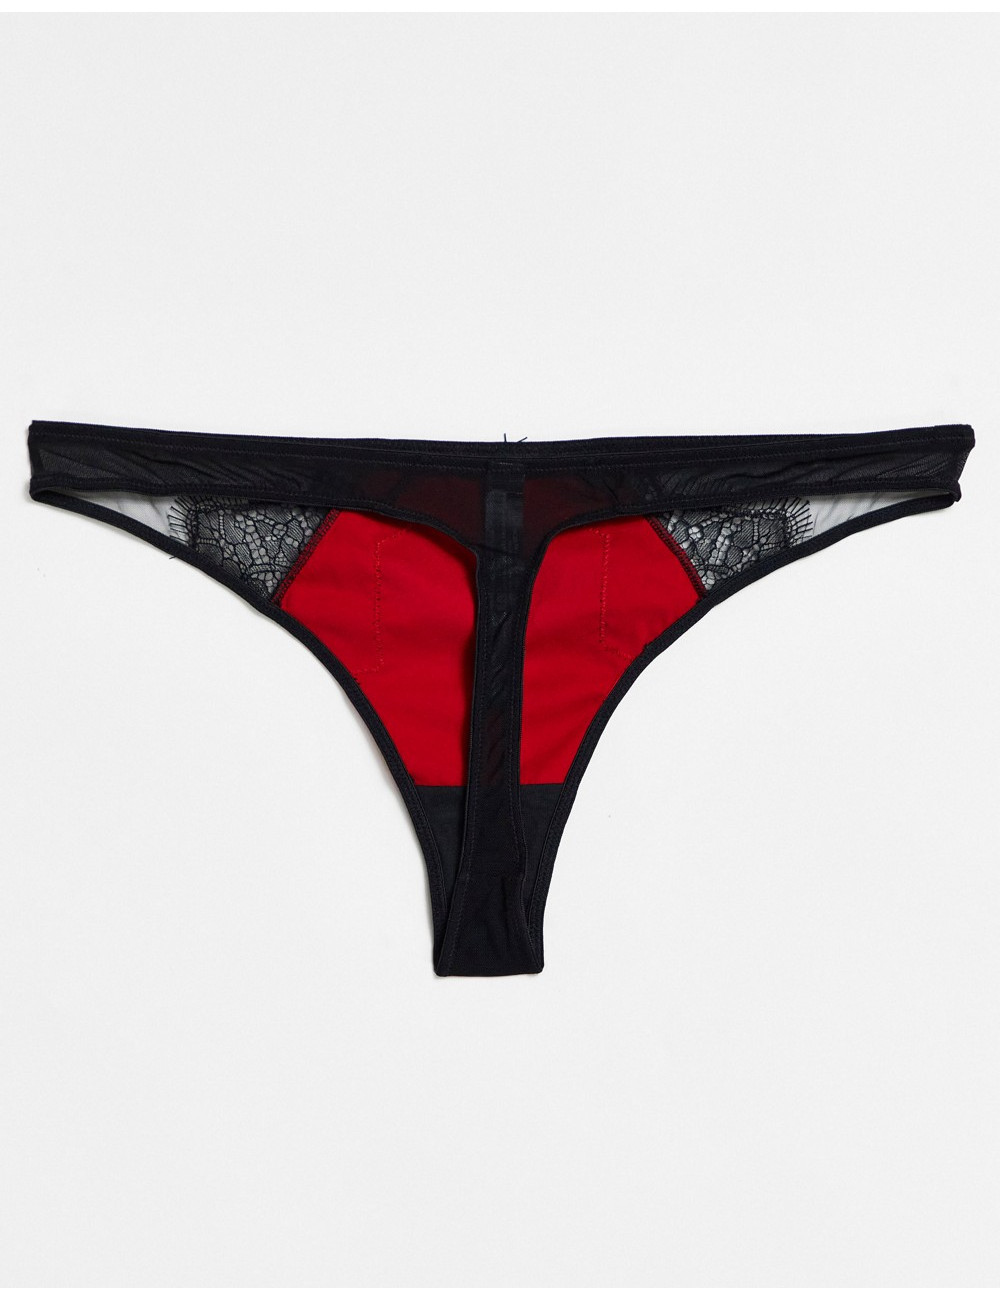 Ann Summers Siren thong in red